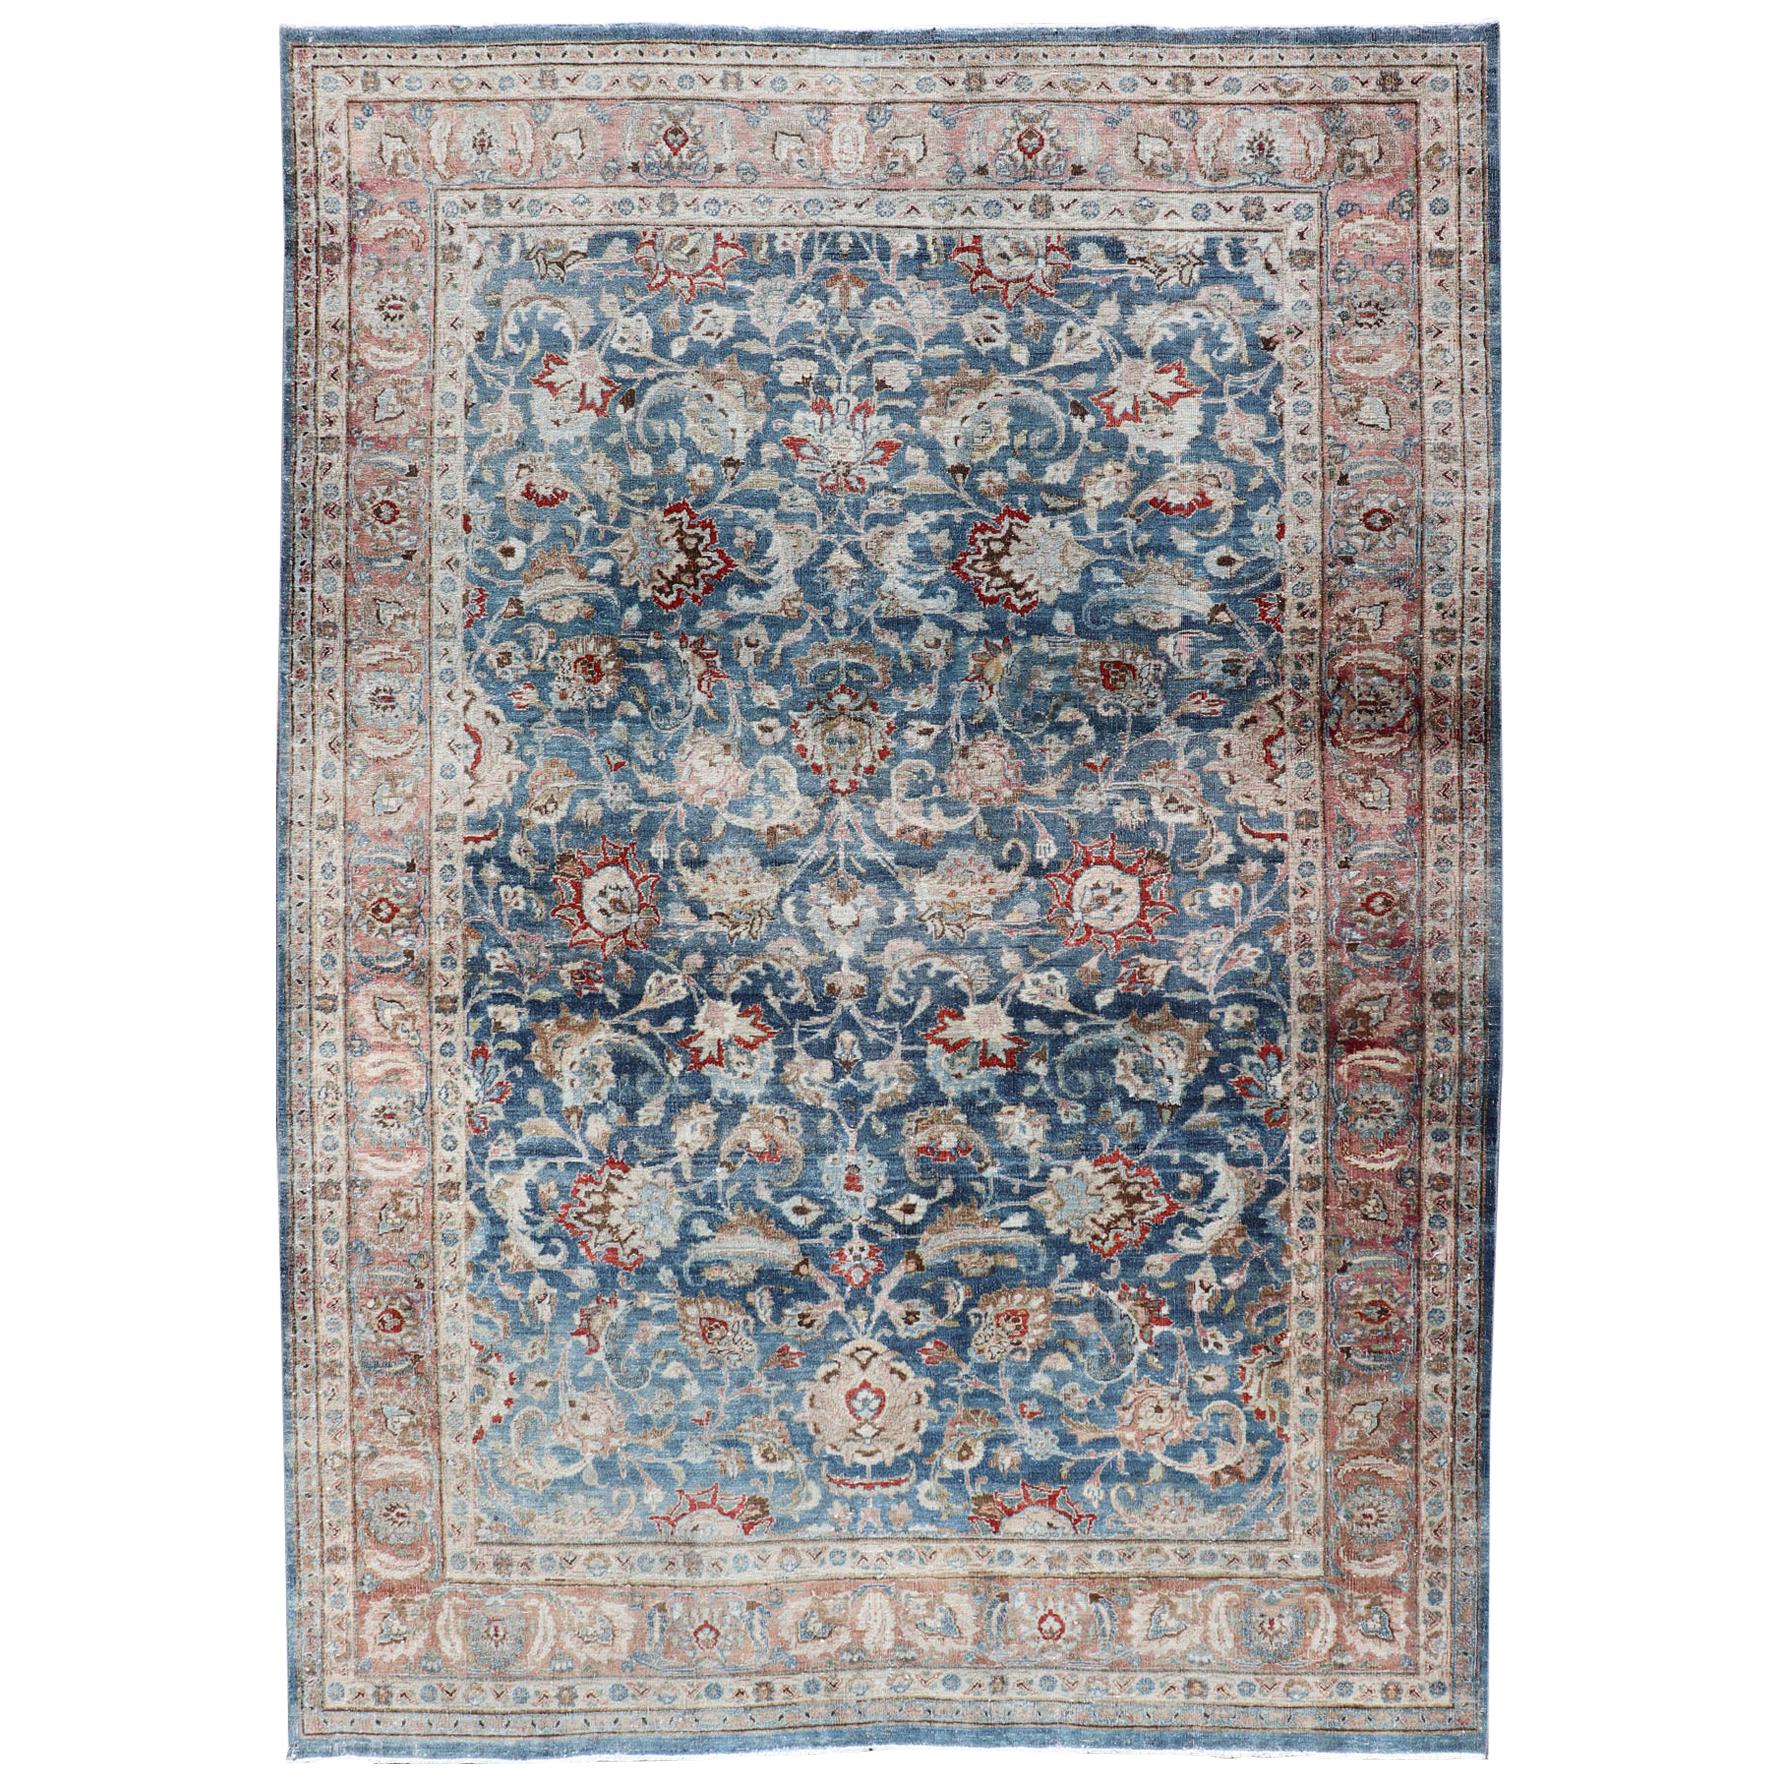 Antique Persian Mashad with Medium in Boteh Blue Background, Salmon Border